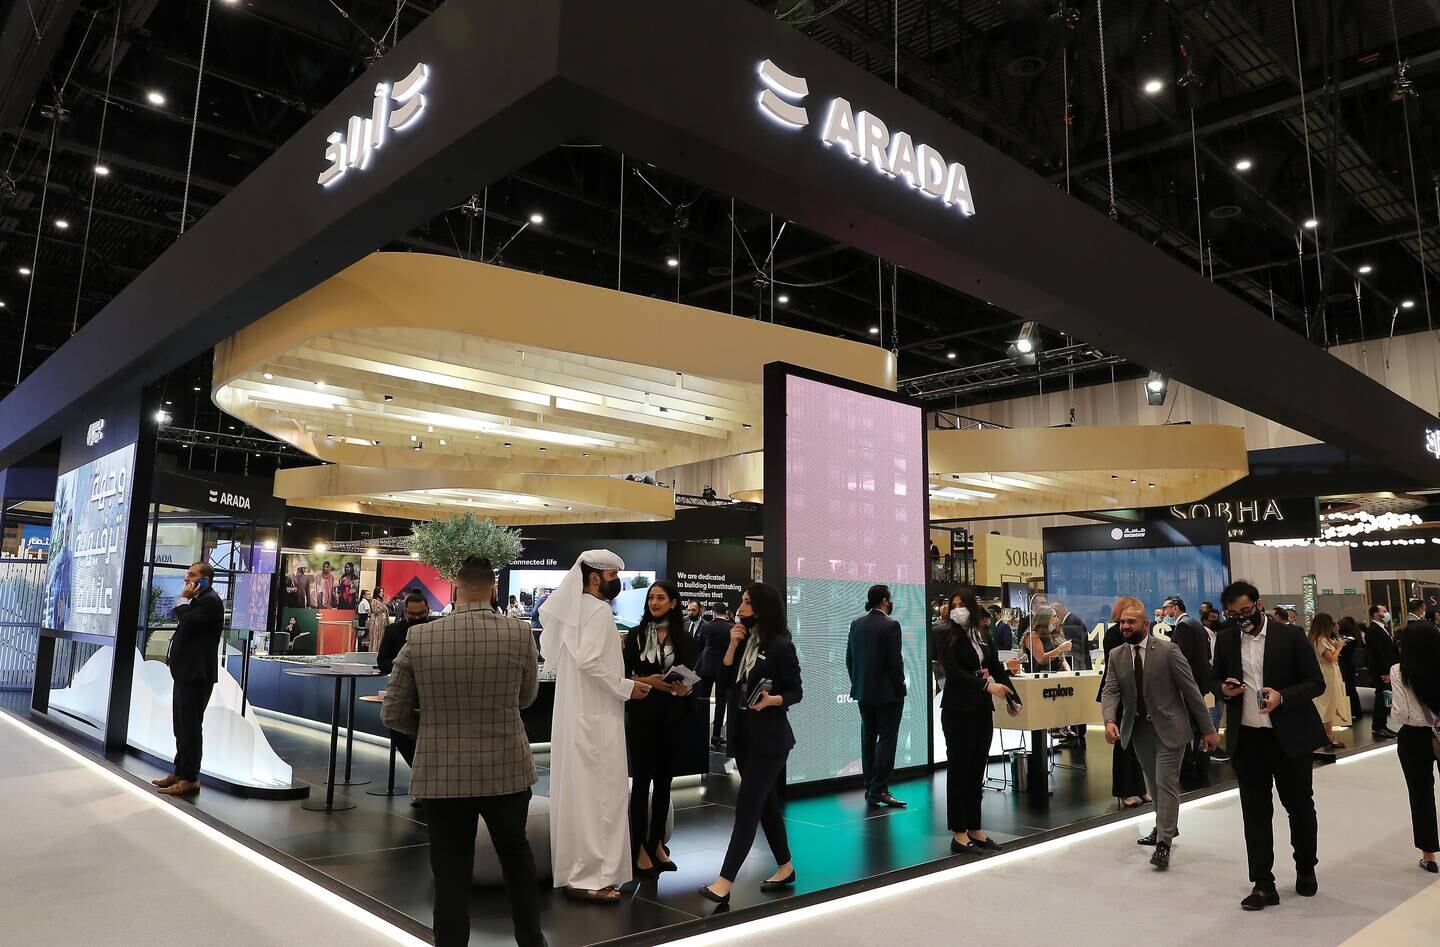 Visitors at the Arada stand on the first day of Cityscape Global, which was held at Dubai Exhibition Centre last year. Pawan Singh / The National